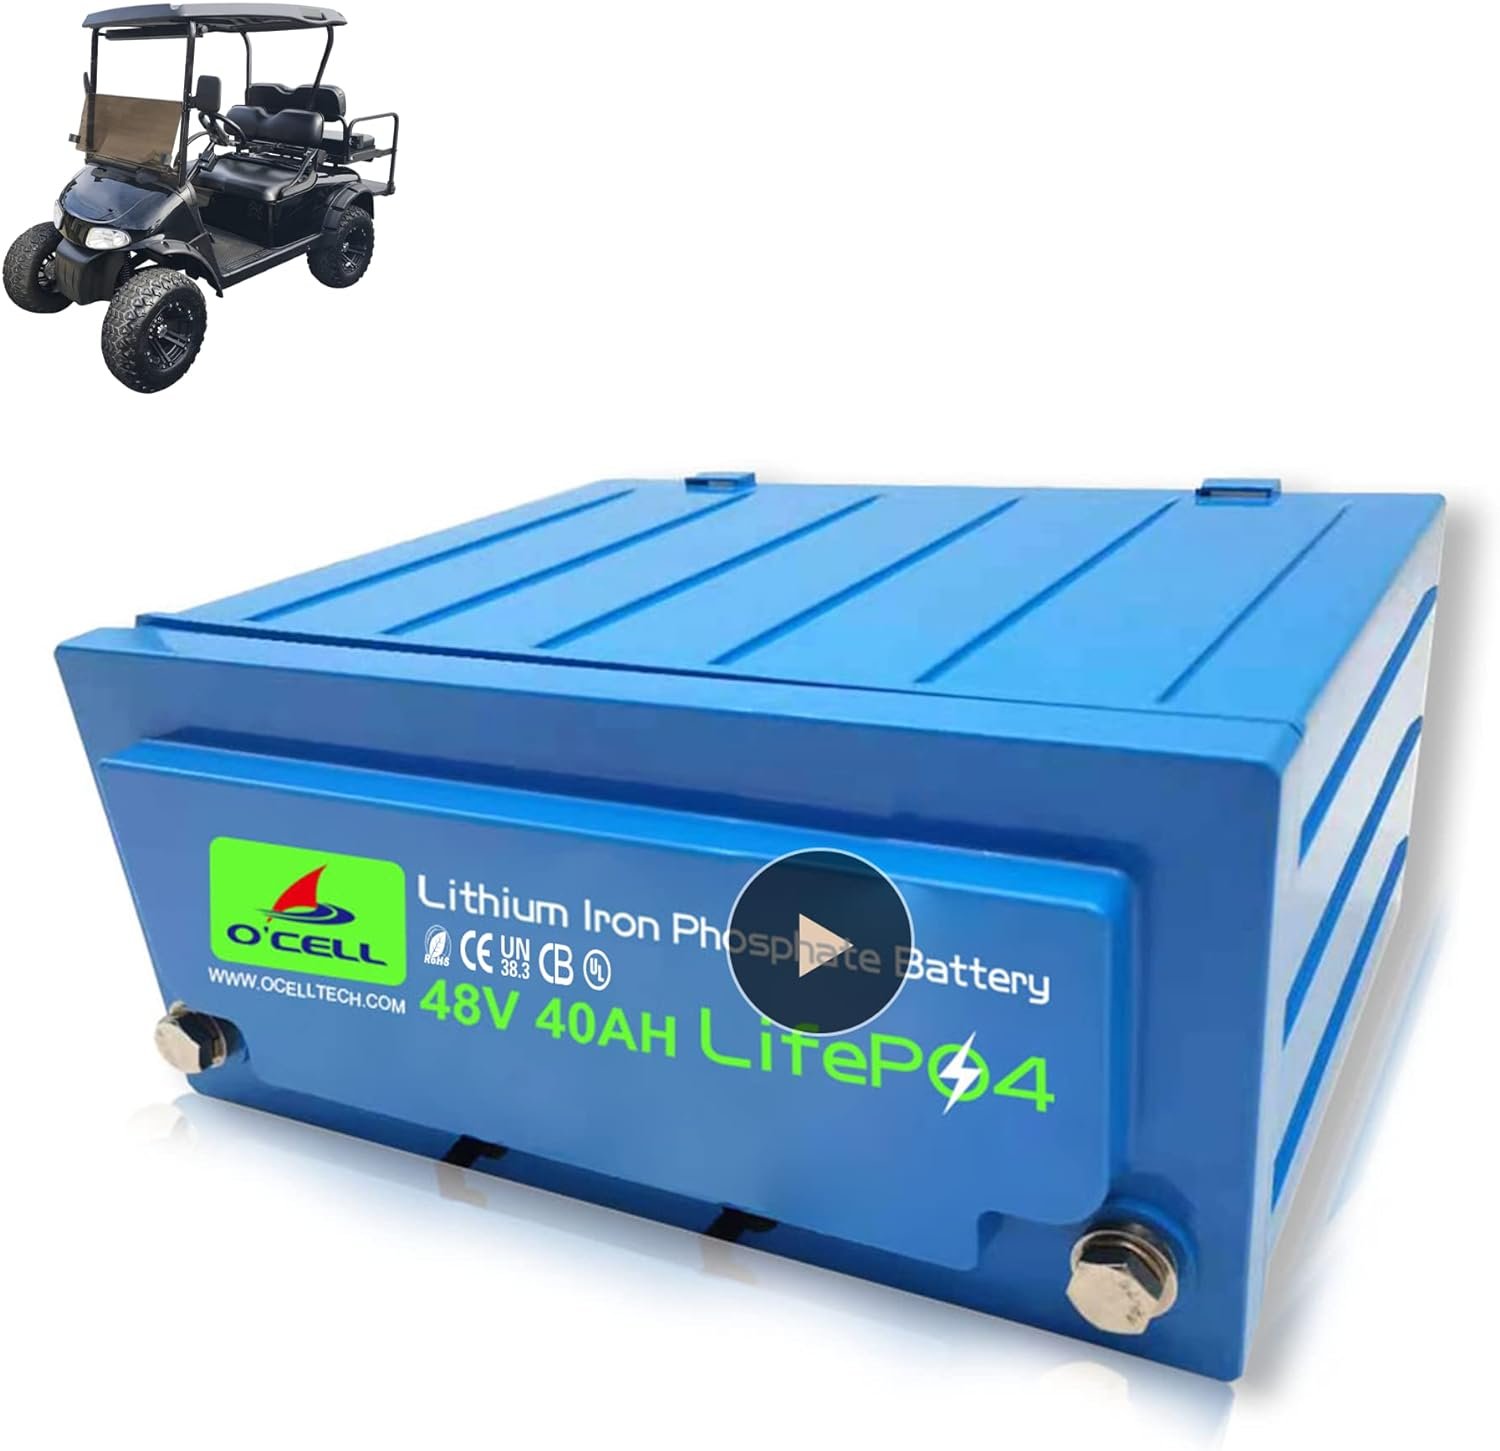 OCELL Official [2-3 Days Delivery] 48V 40Ah Lithium Iron Phosphate Battery with 80A BMS Board, LiFePO4 Battery 10+ Years Lifetime, for Golf Cart 4096W Power, Marine, RVs, Solar Off-Grid, Grid Outages